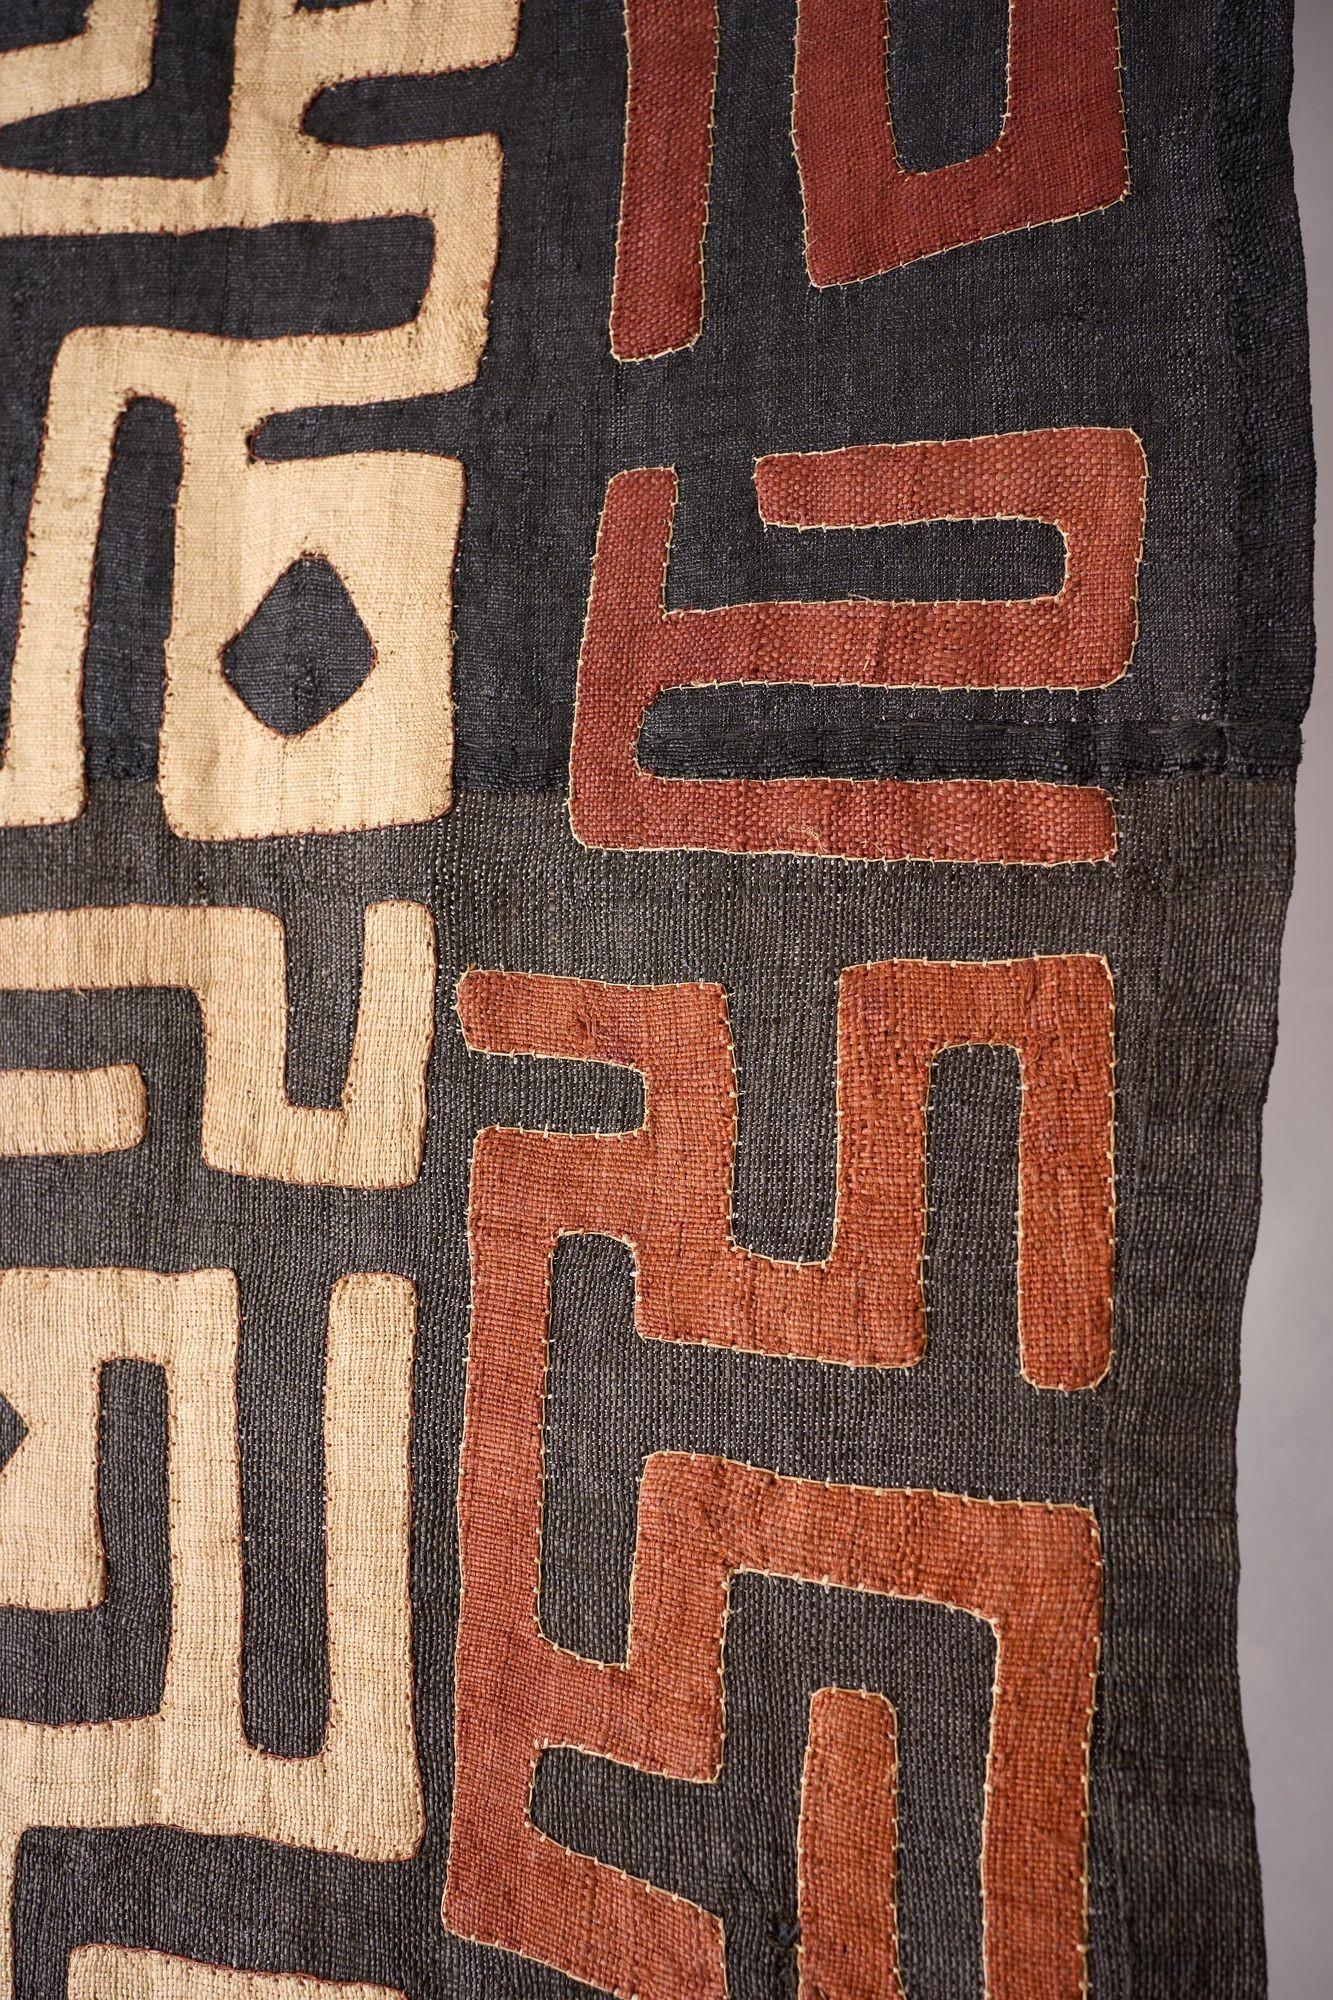 20th century African Kuba cloth from the Congo - Red and black For Sale 1